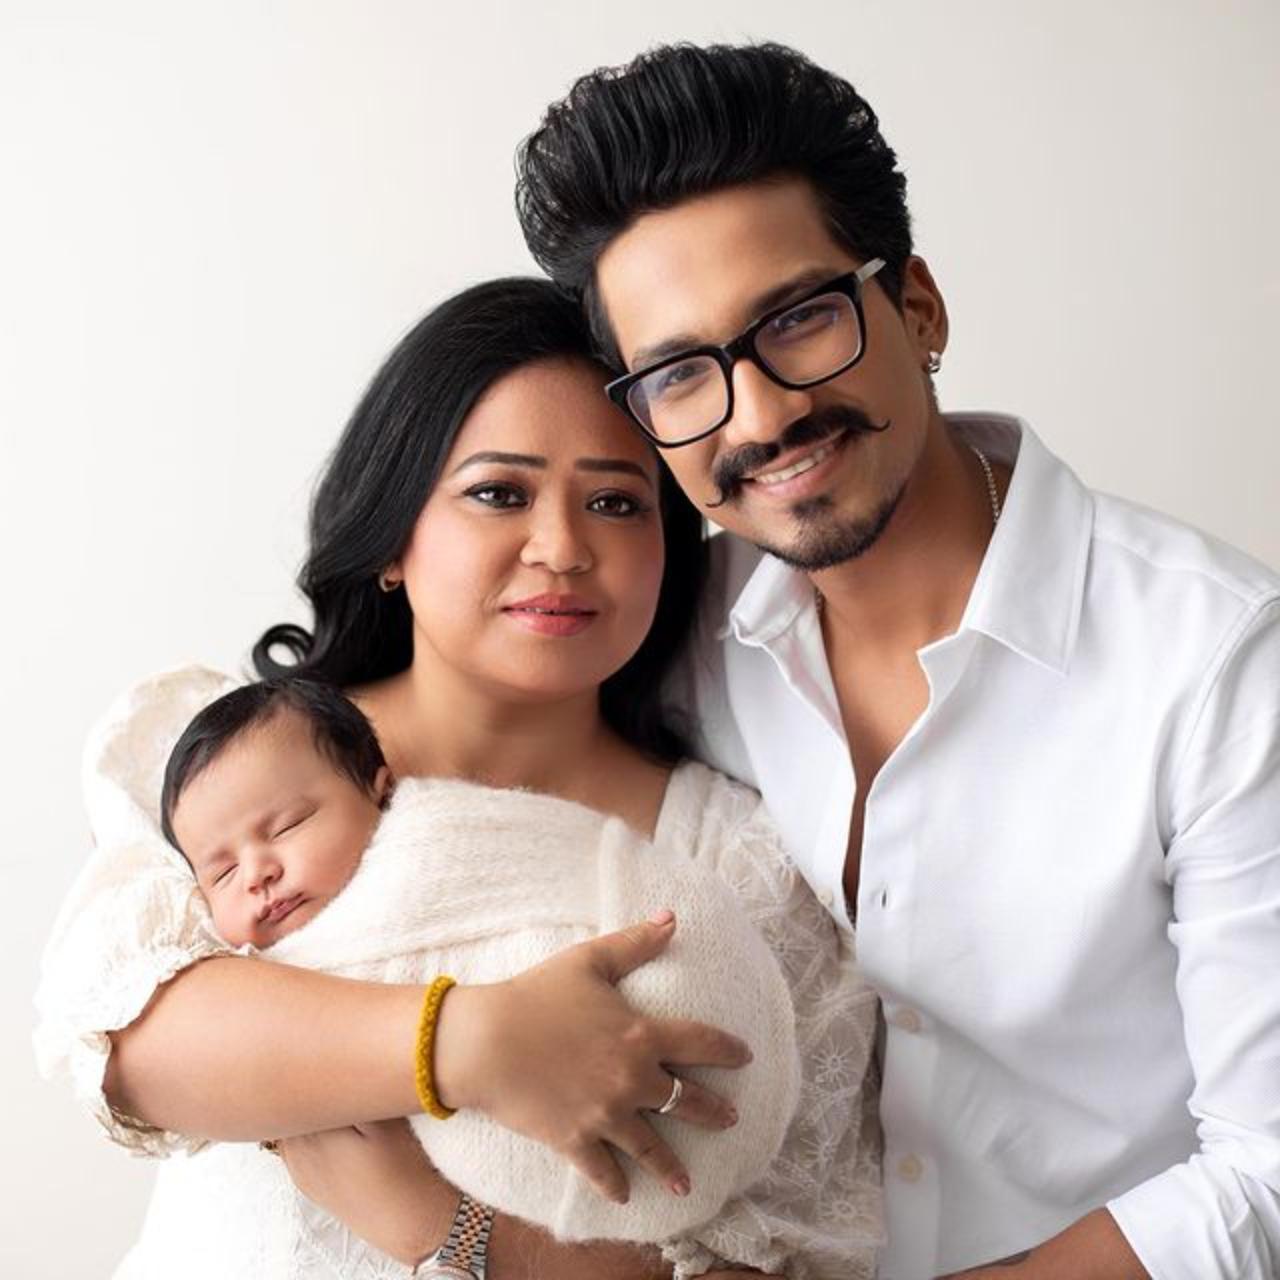 Bharti Singh named her son Laksh. Harsh and Bharti usually call their son by his nickname Golla